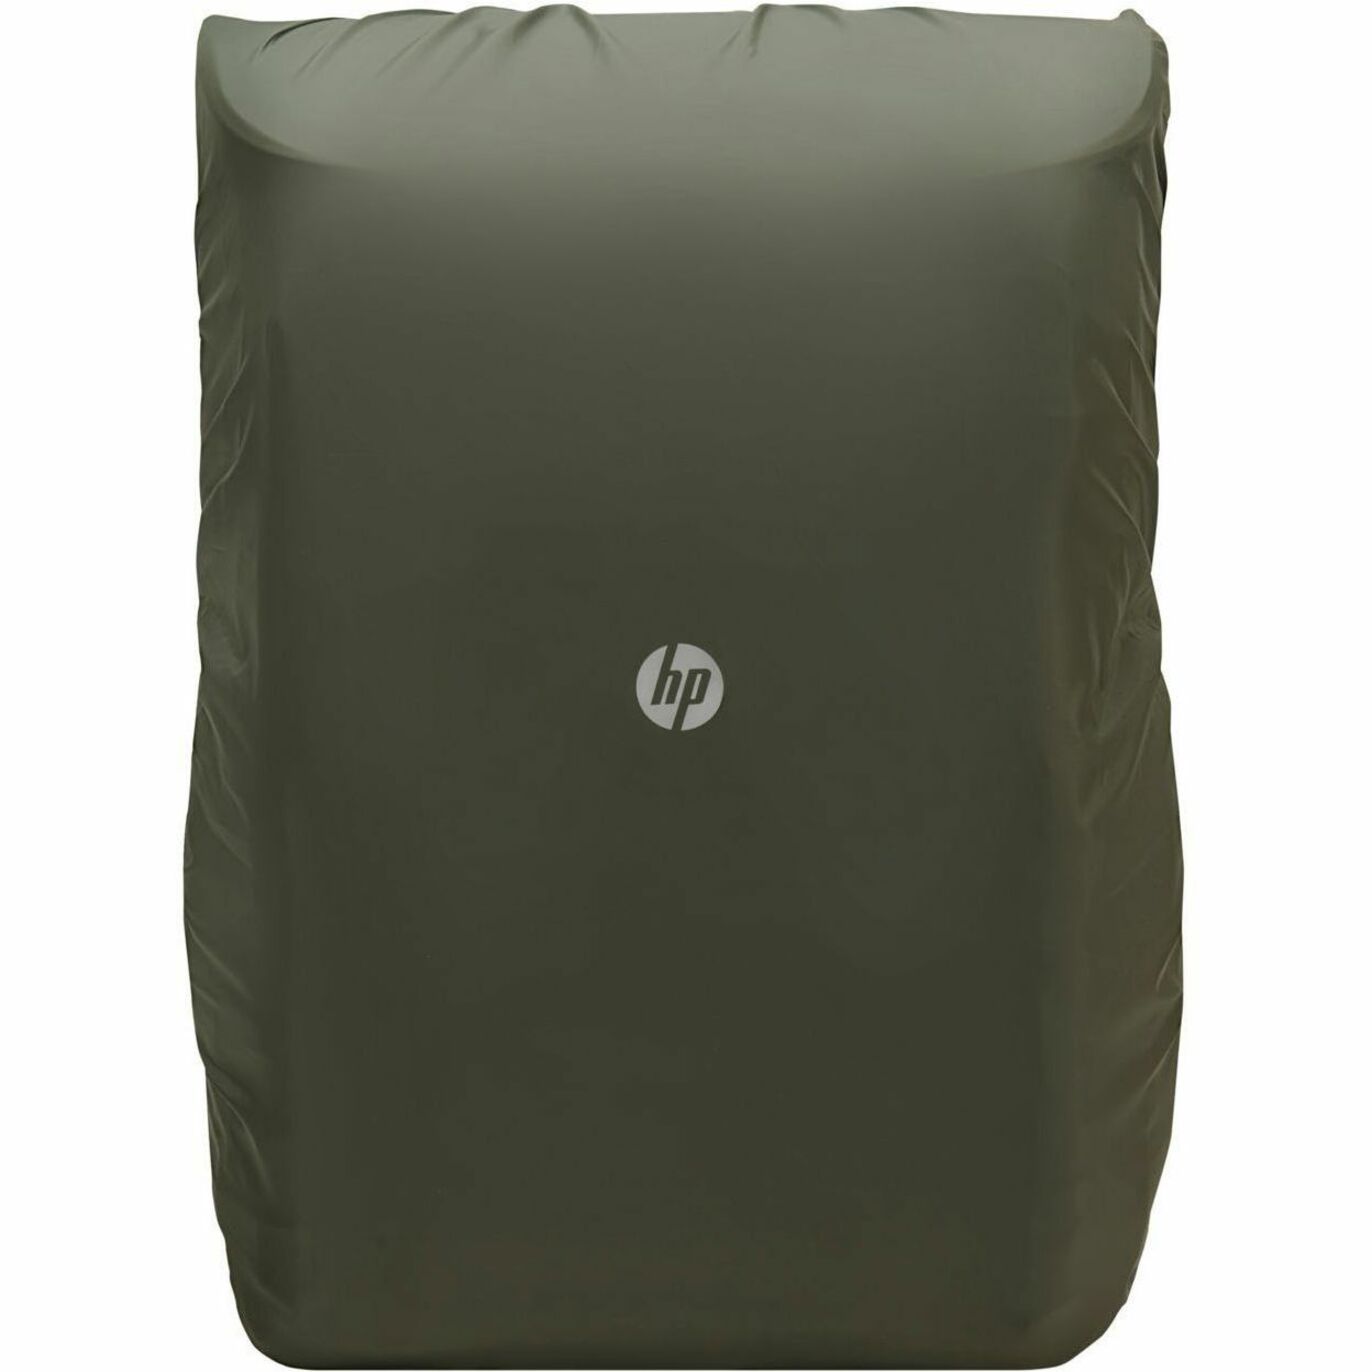 HP Carrying Case (Backpack) for 15.6" Notebook - Gray, Green (9J496AA)